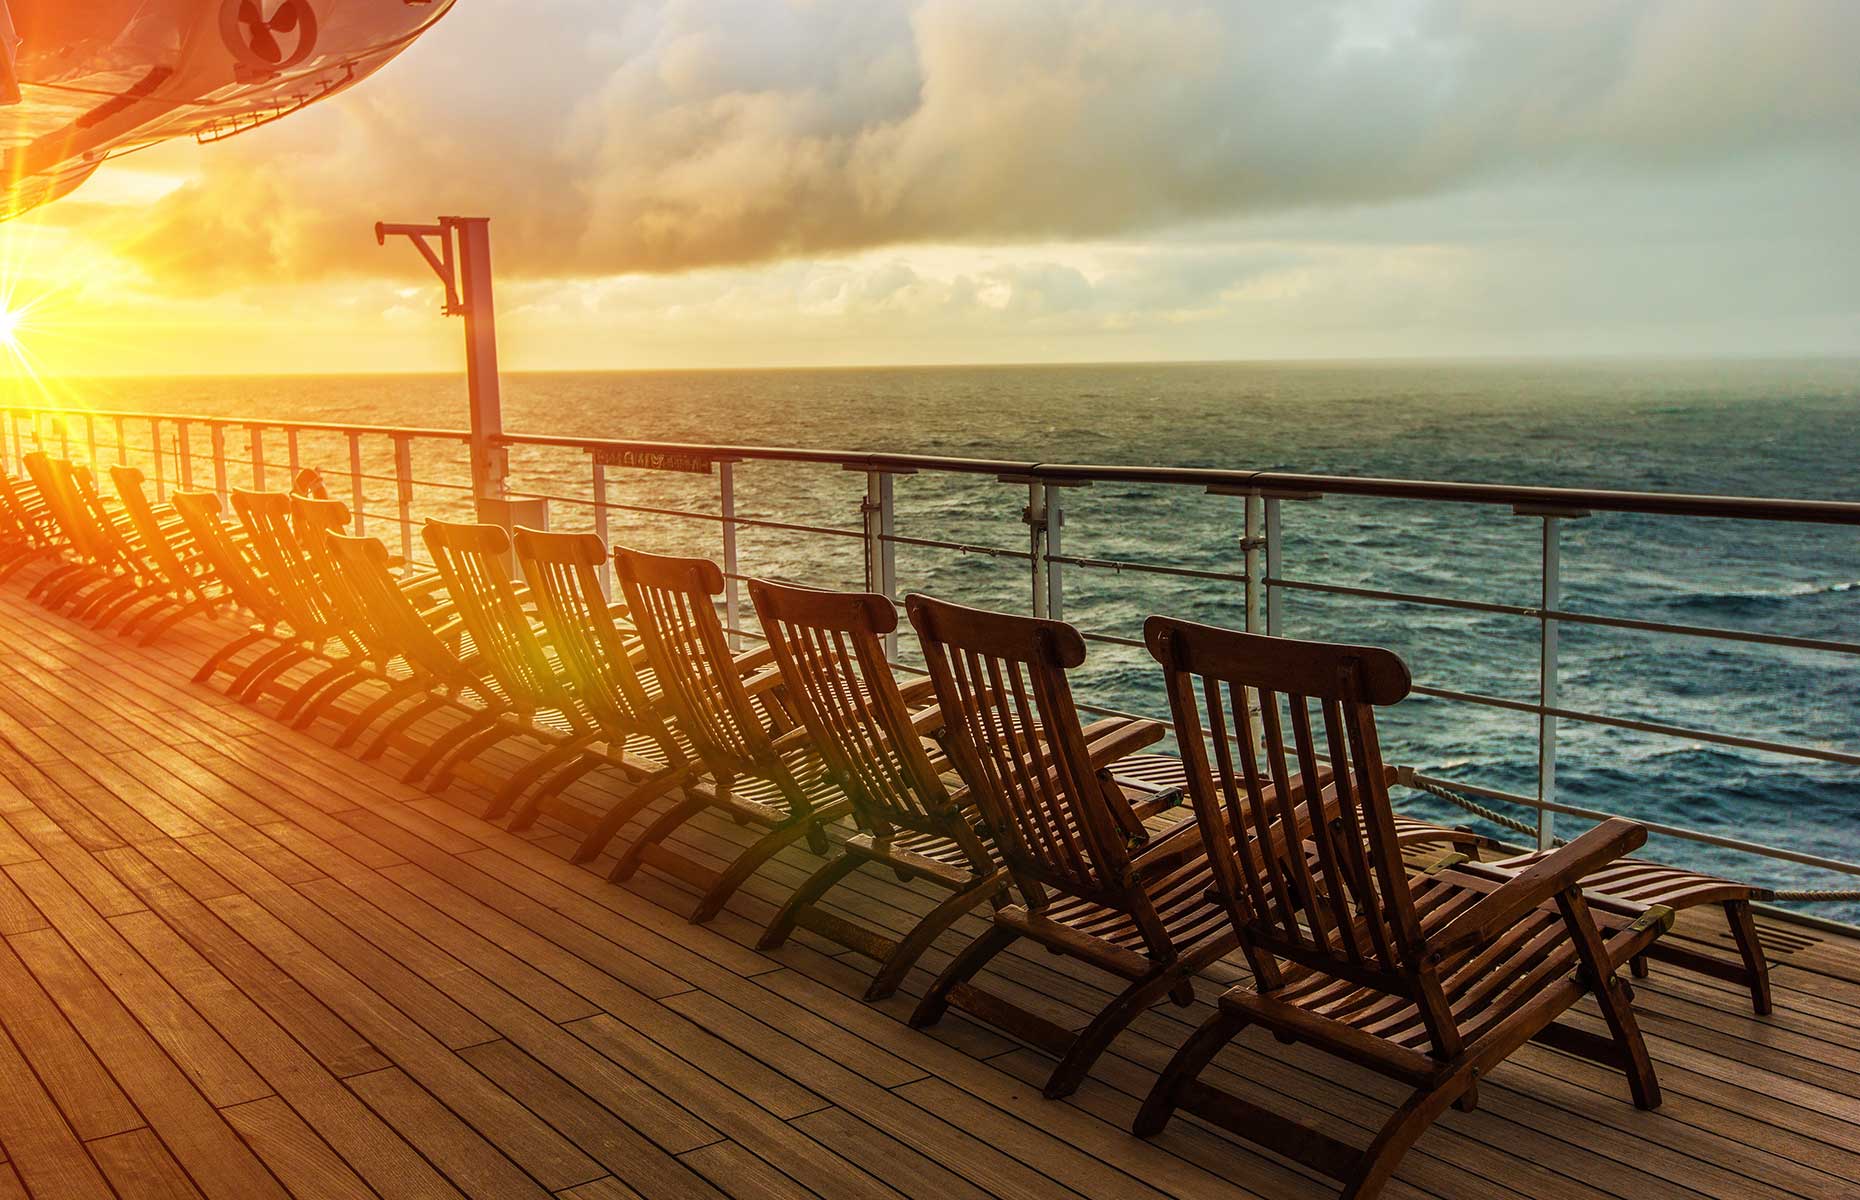 Generic shot of a cruise ship deck with wooden deck chairs facing the sea and the setting sun (Image:  By Virrage Images/Shutterstock))